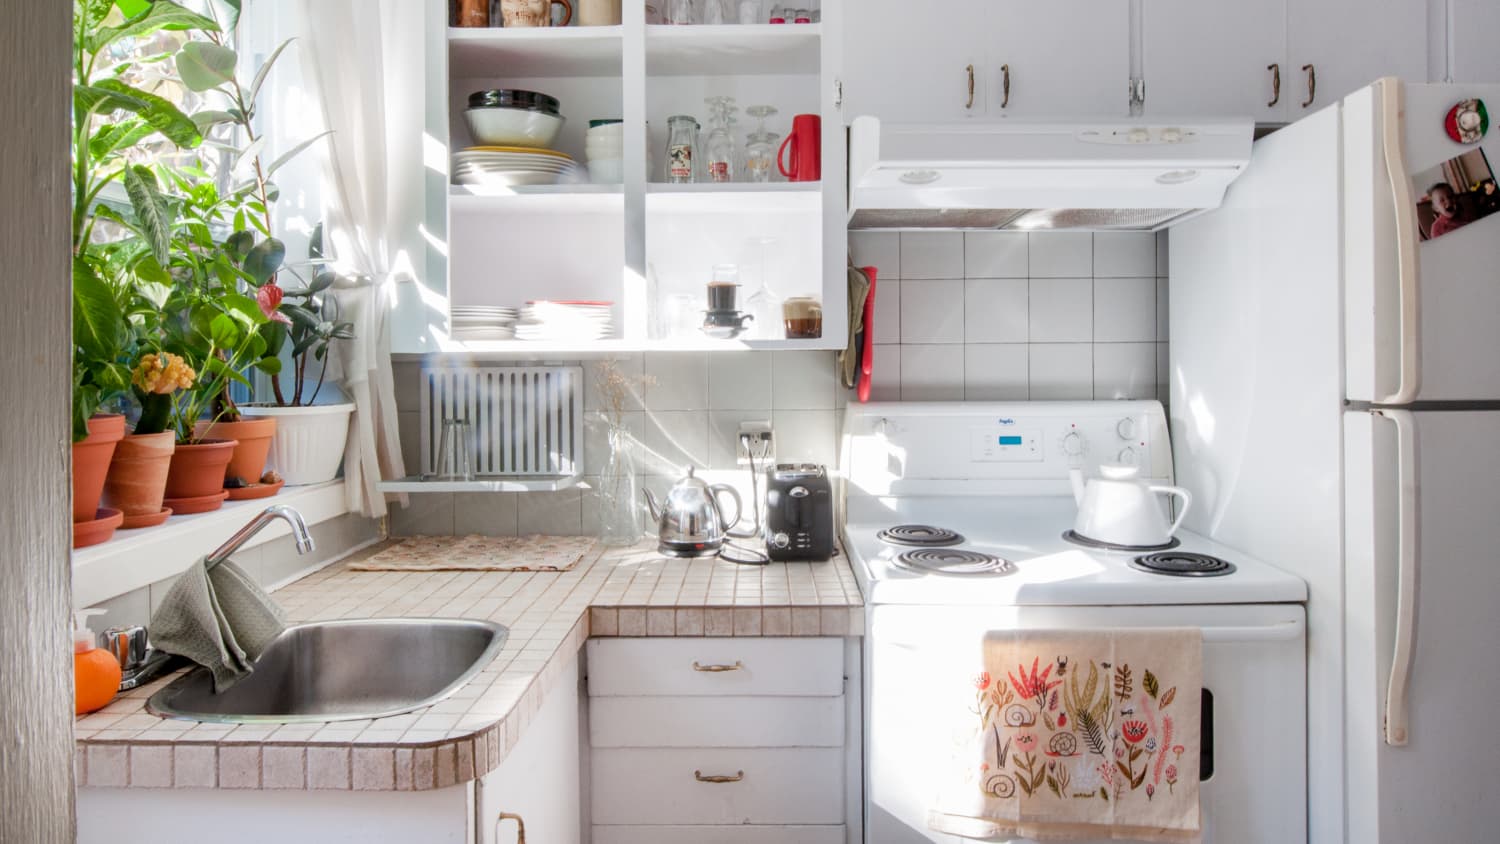 11 Items That Will Upgrade Your Kitchen for Less Than $5